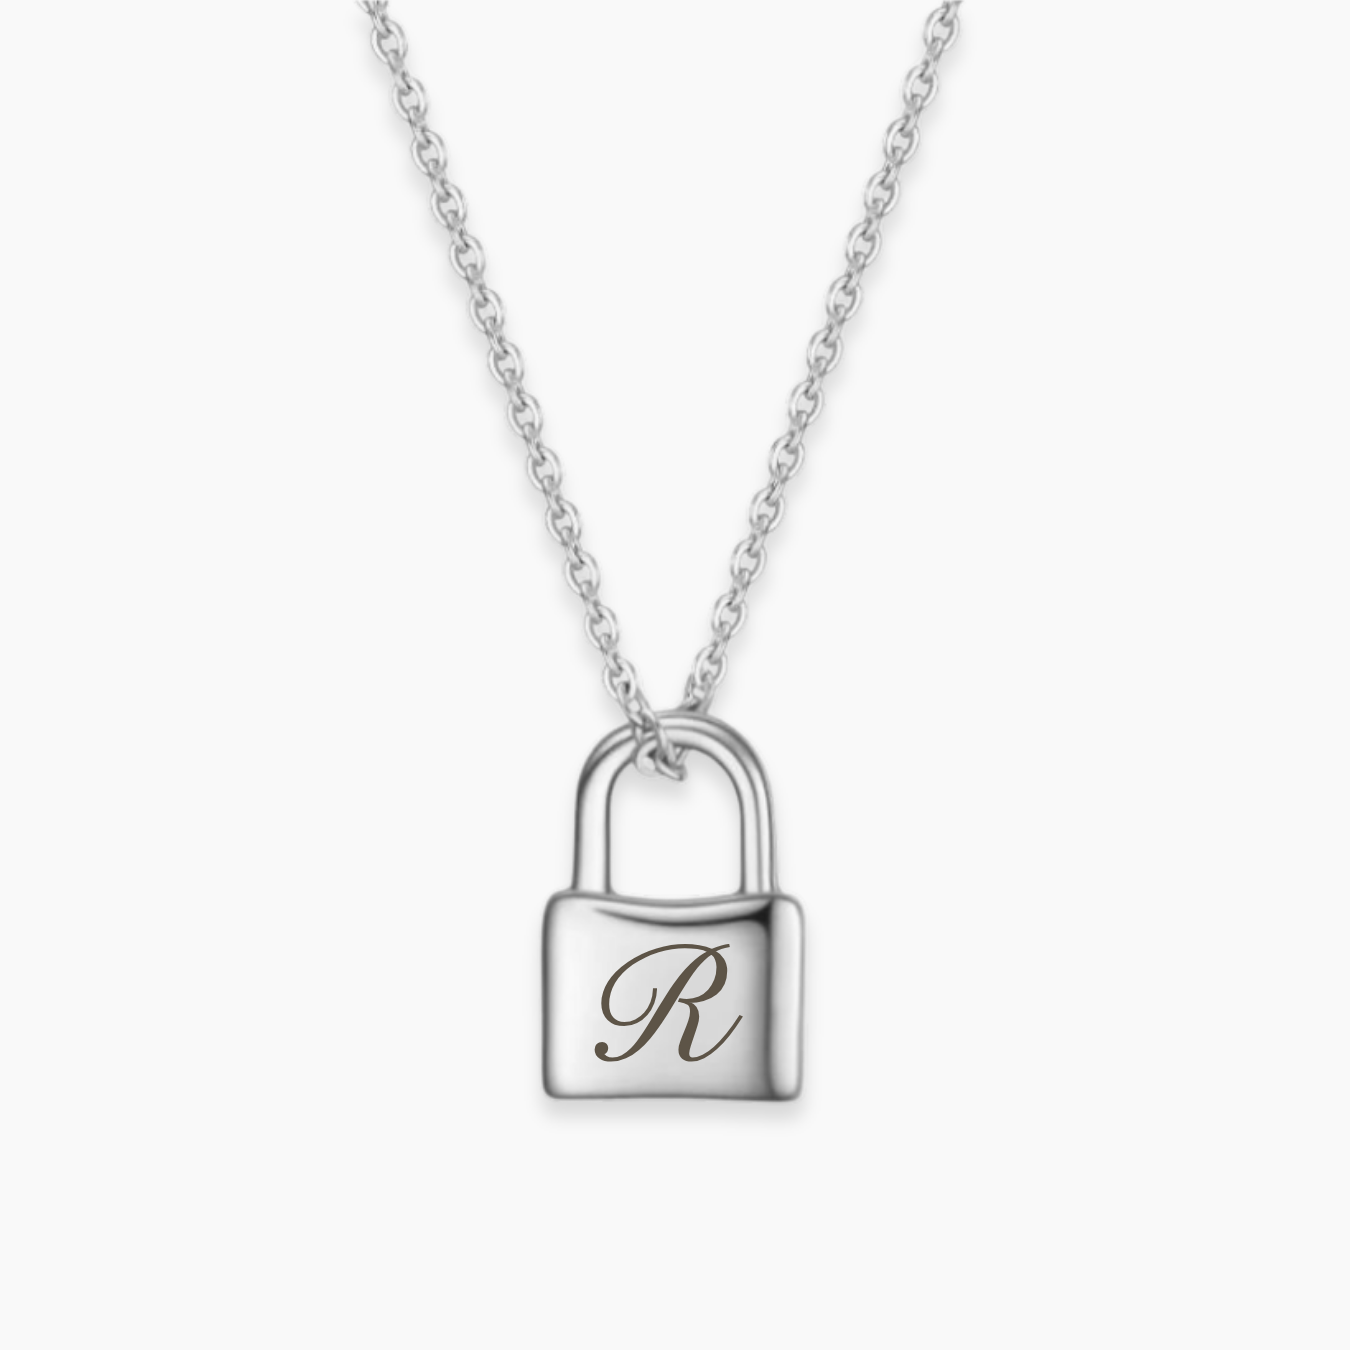 LOCK Personalizable Necklace | Initials